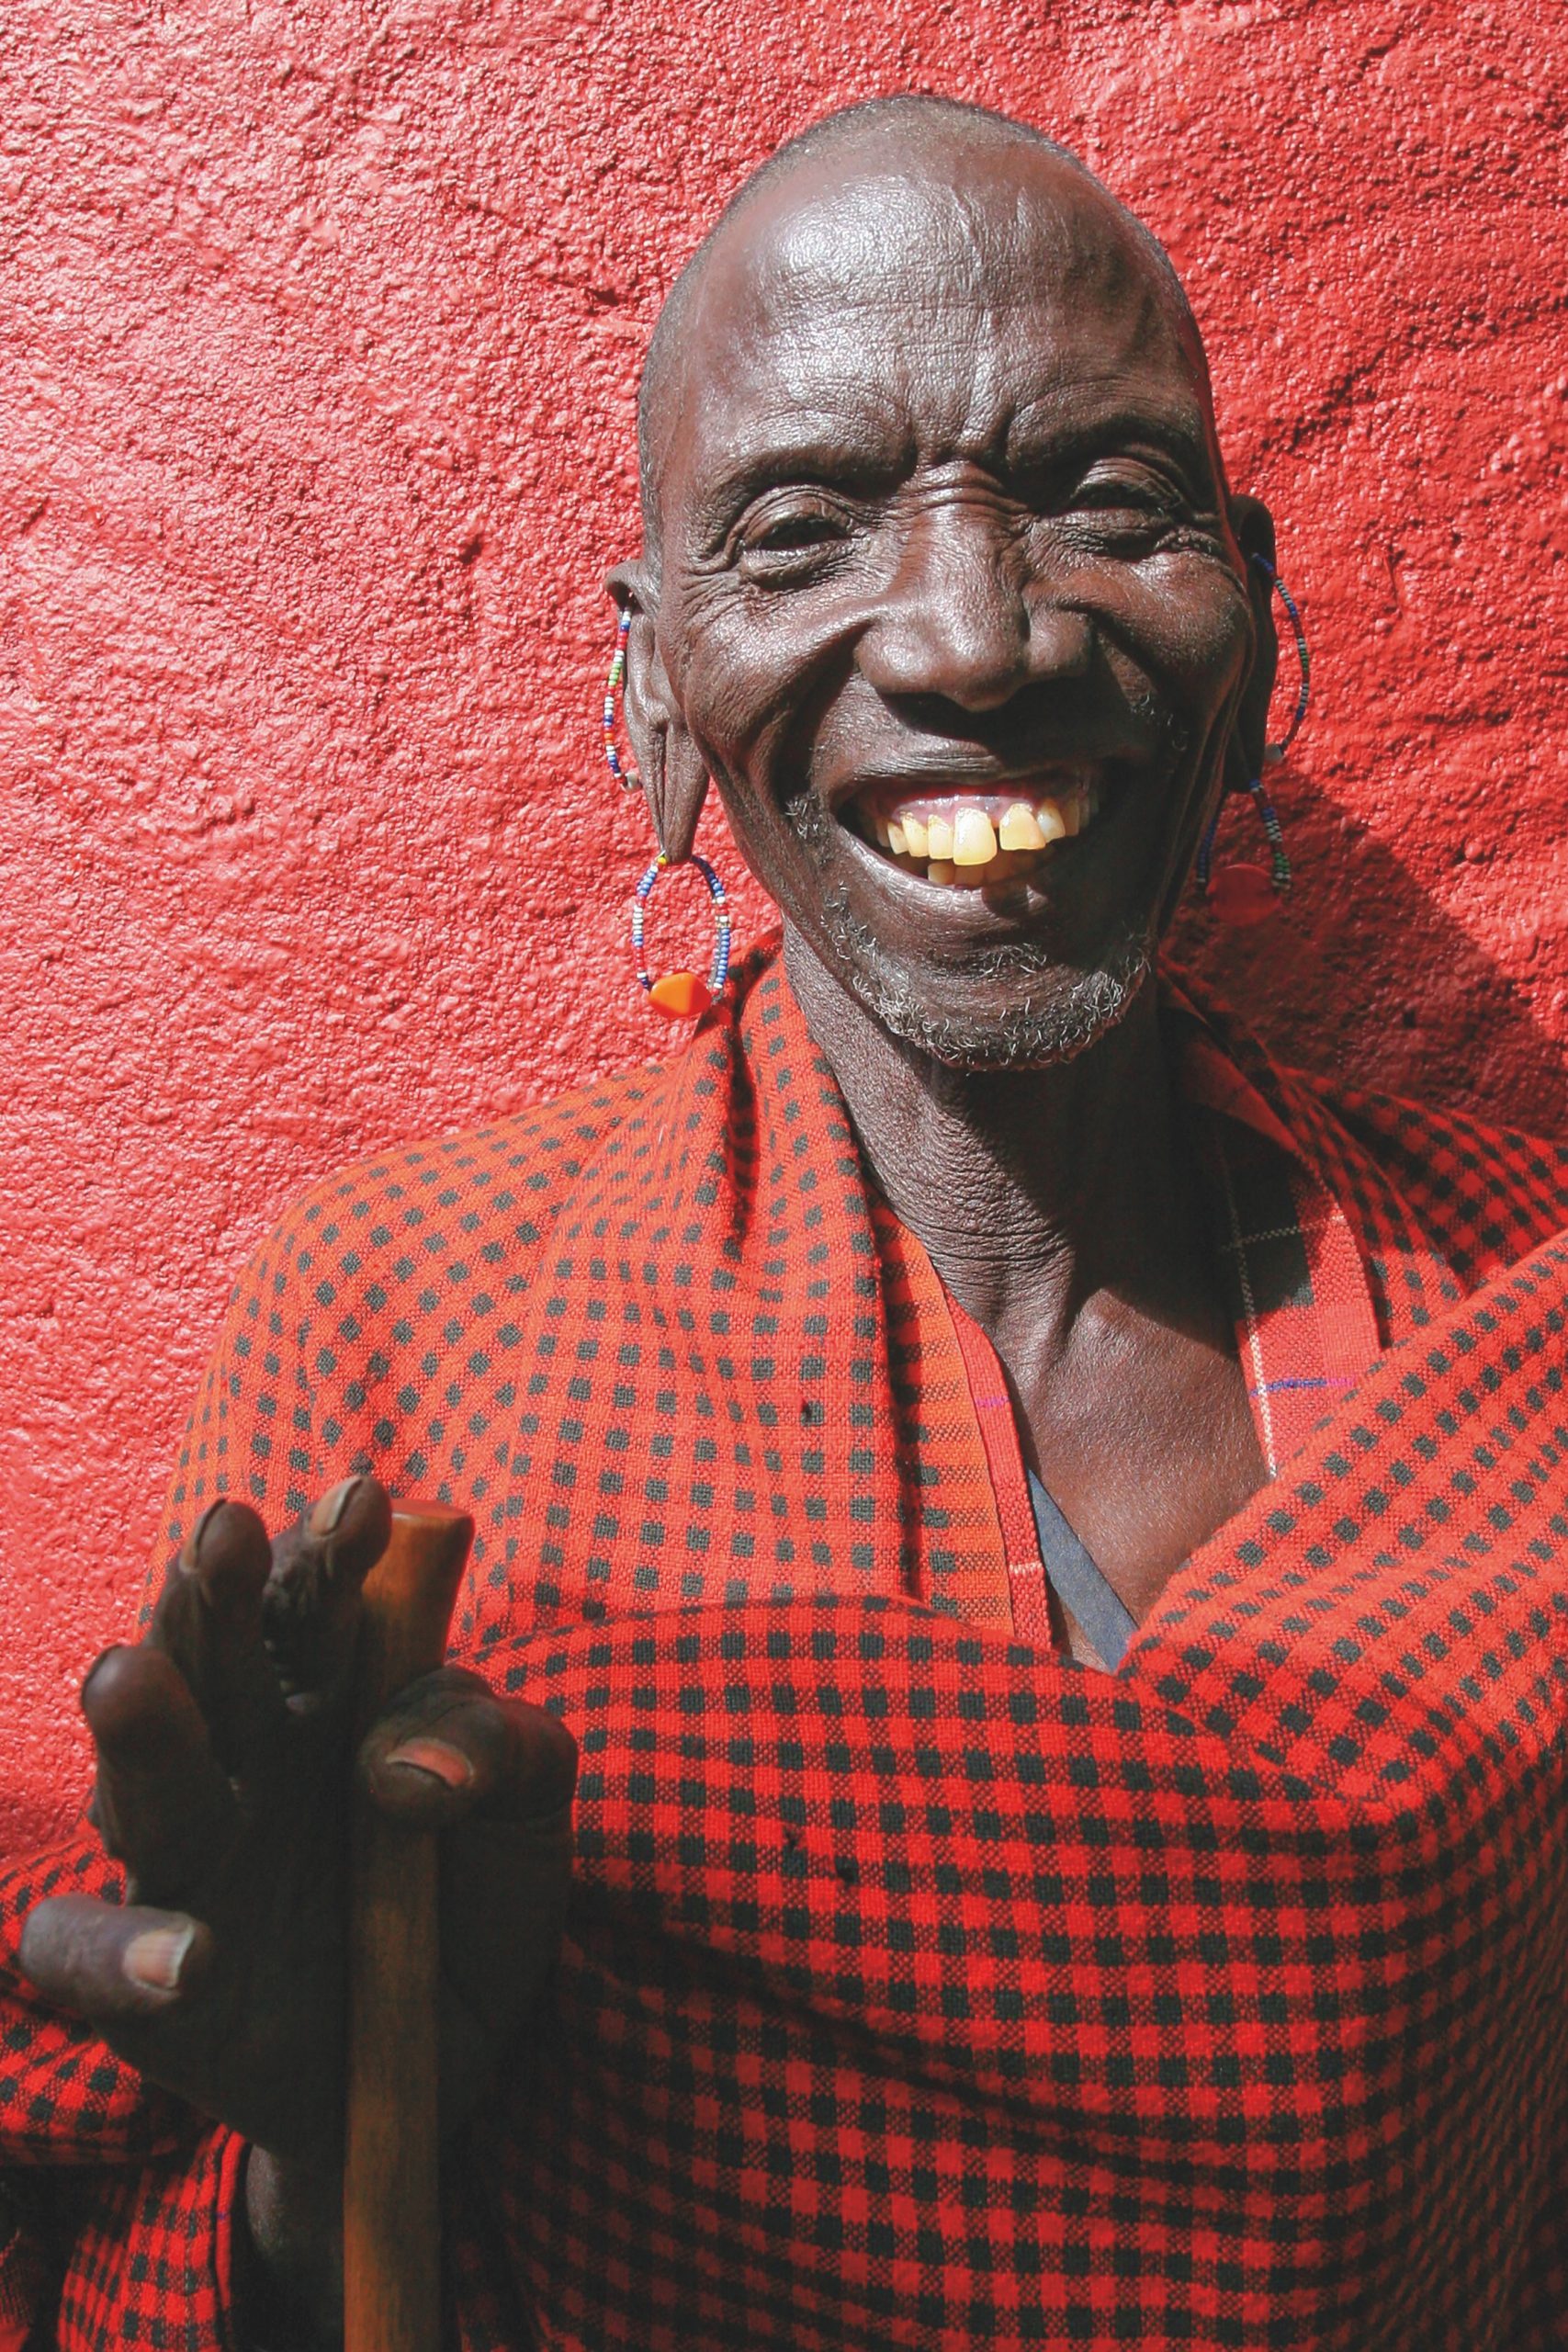 A dark-skinned man smiles. He is wearing earrings and a red and black checked shirt. The background is a red wall.